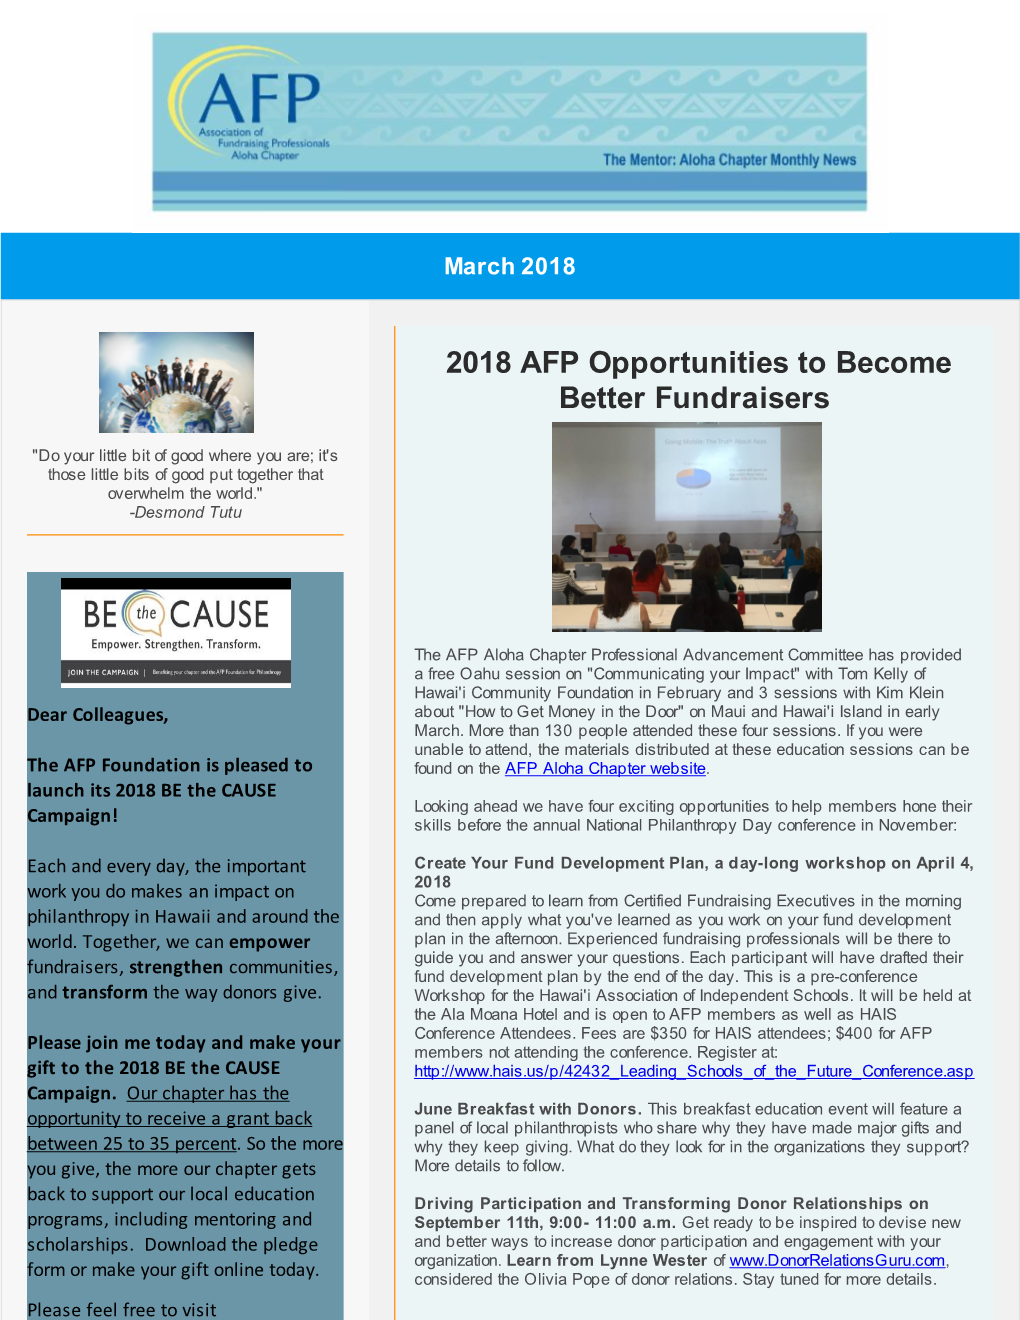 2018 AFP Opportunities to Become Better Fundraisers